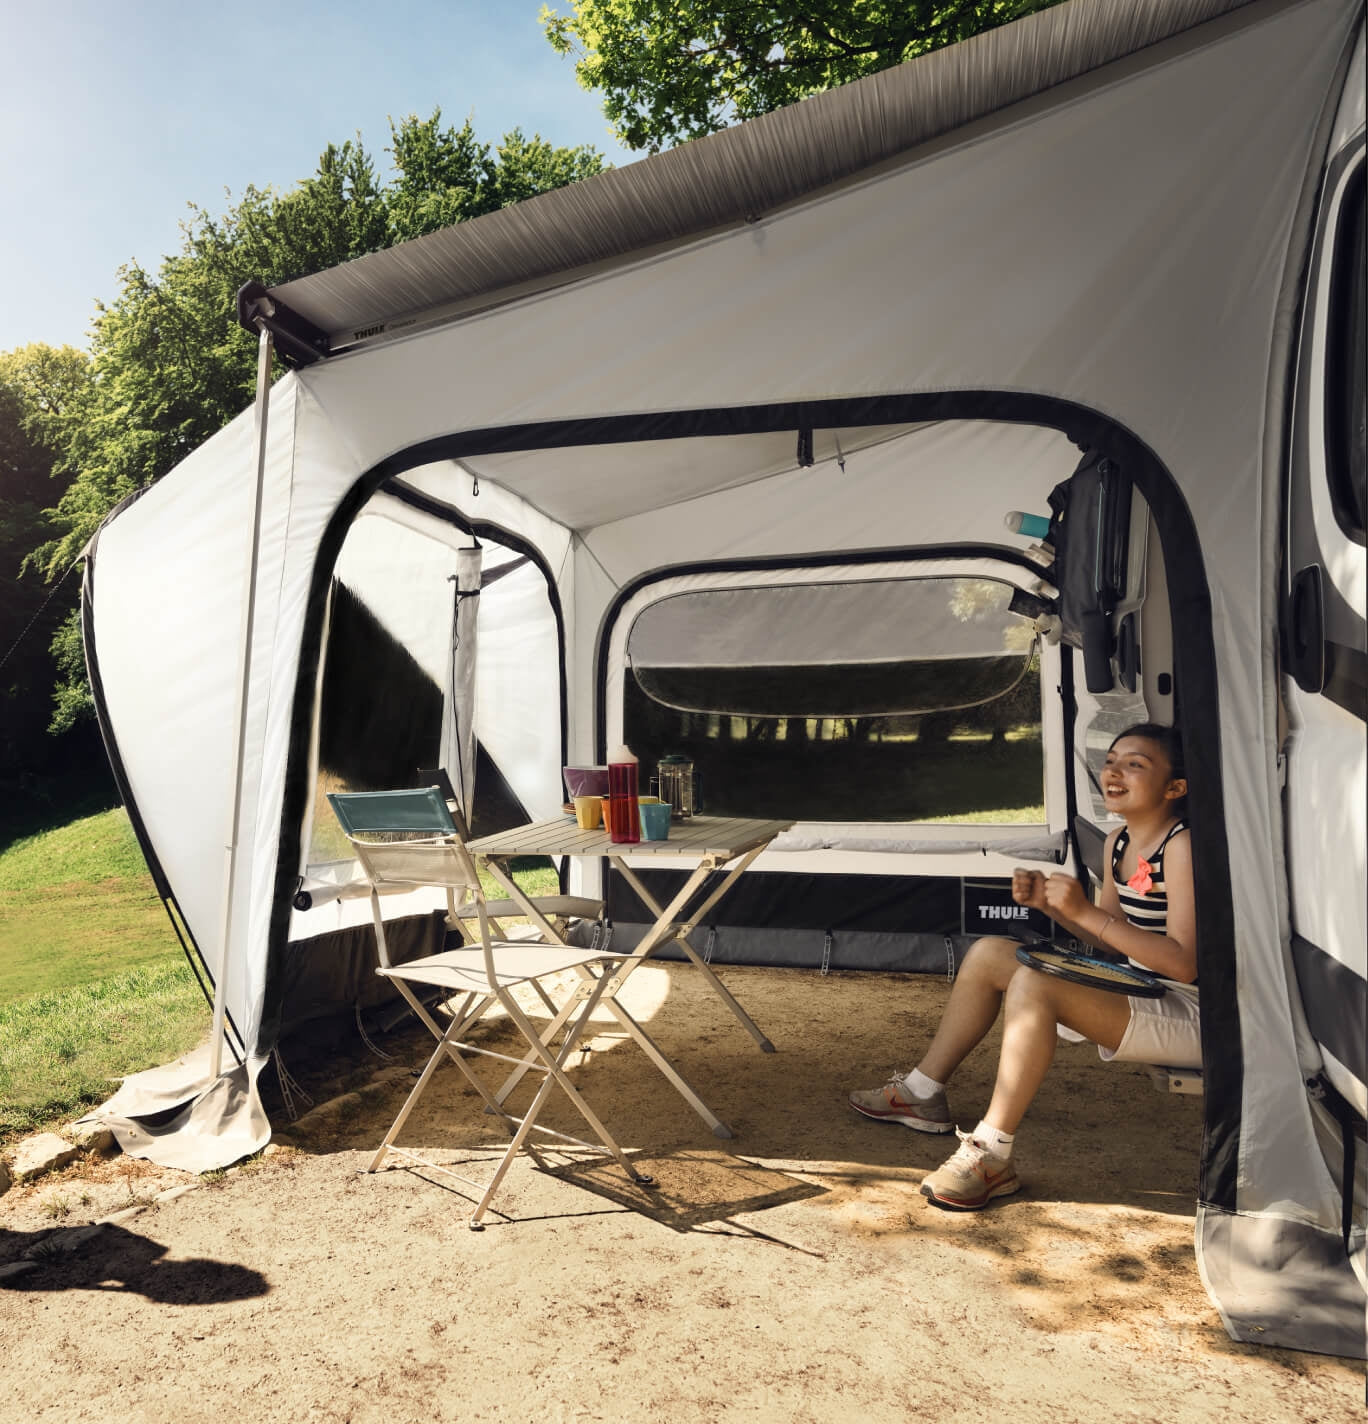 Thule QuickFit Awning Tent Privacy Room Image